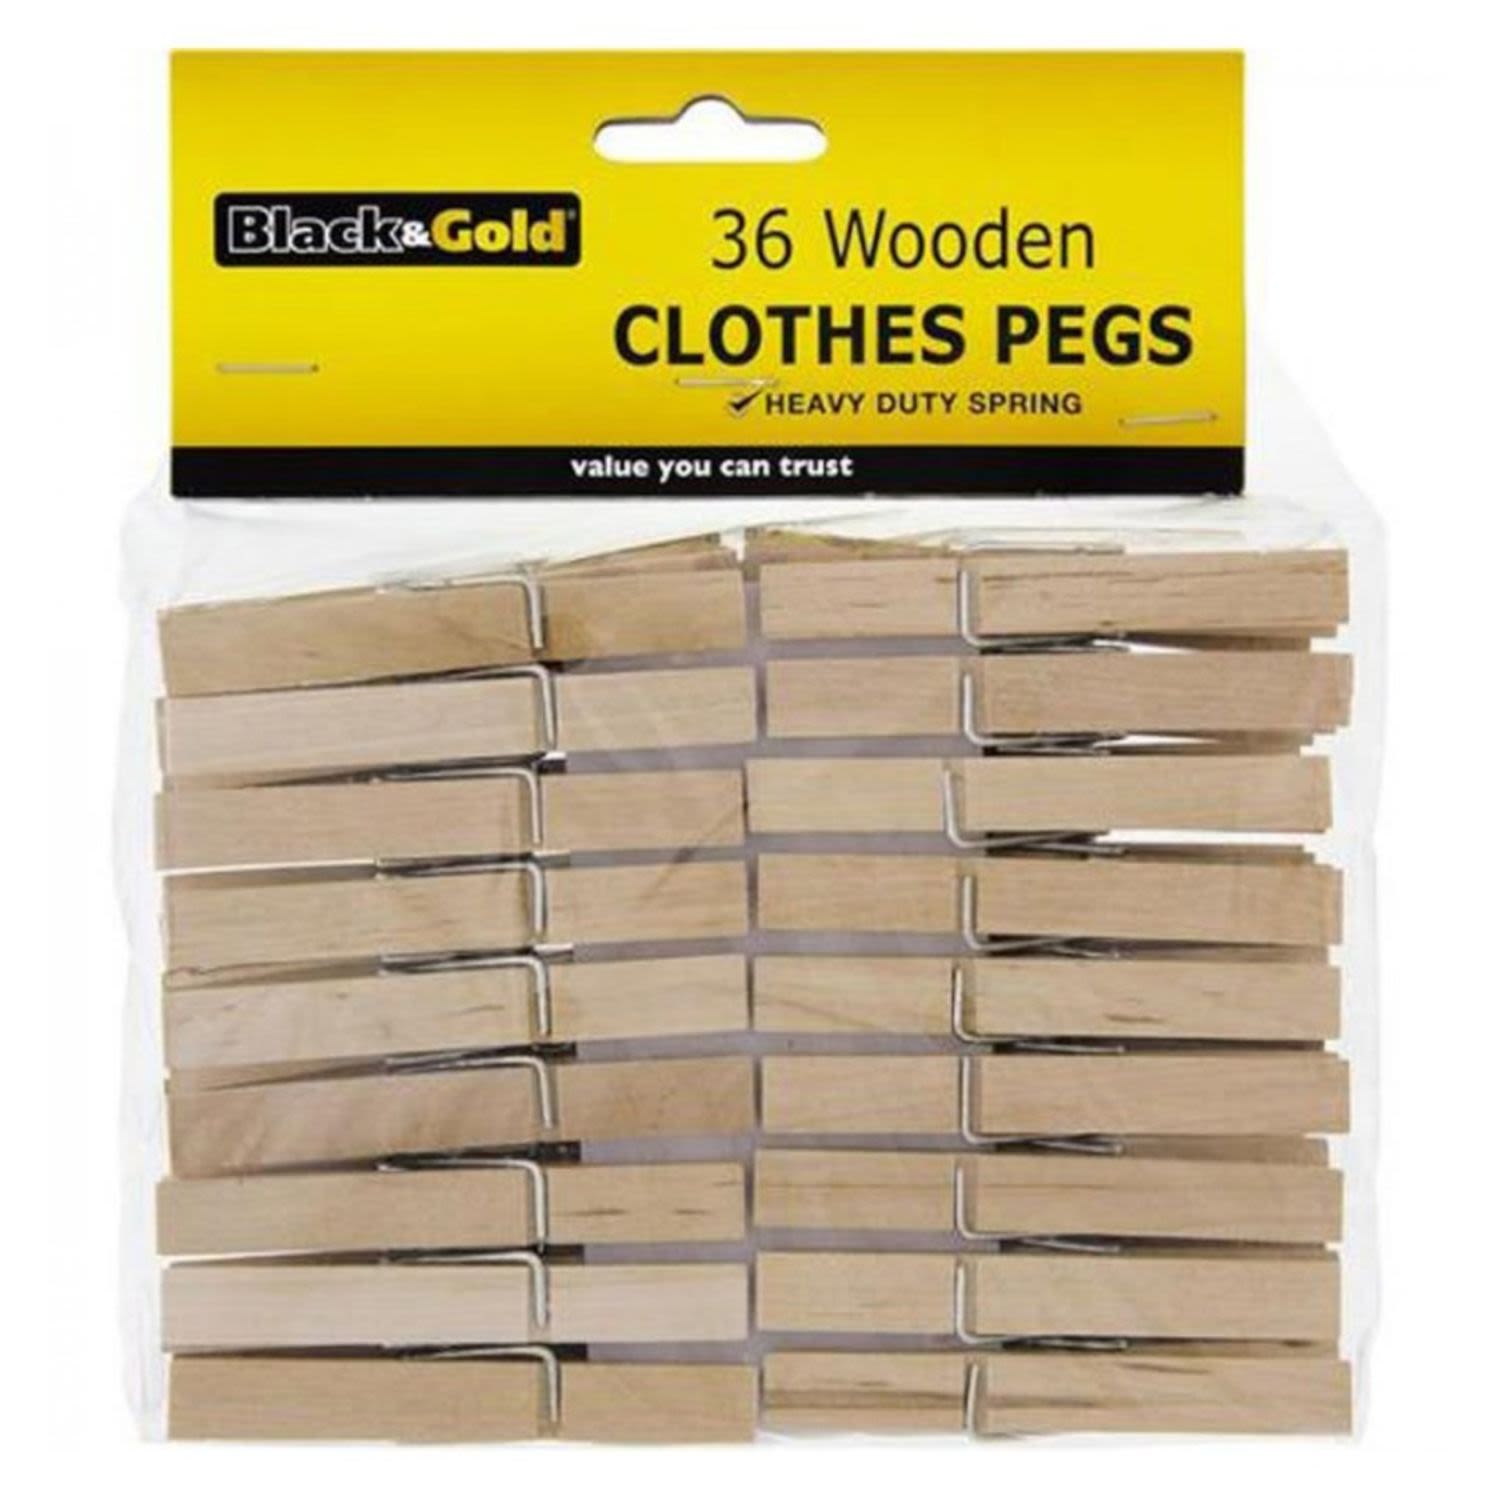 Black & Gold Clothes Pegs Wood, 36 Each